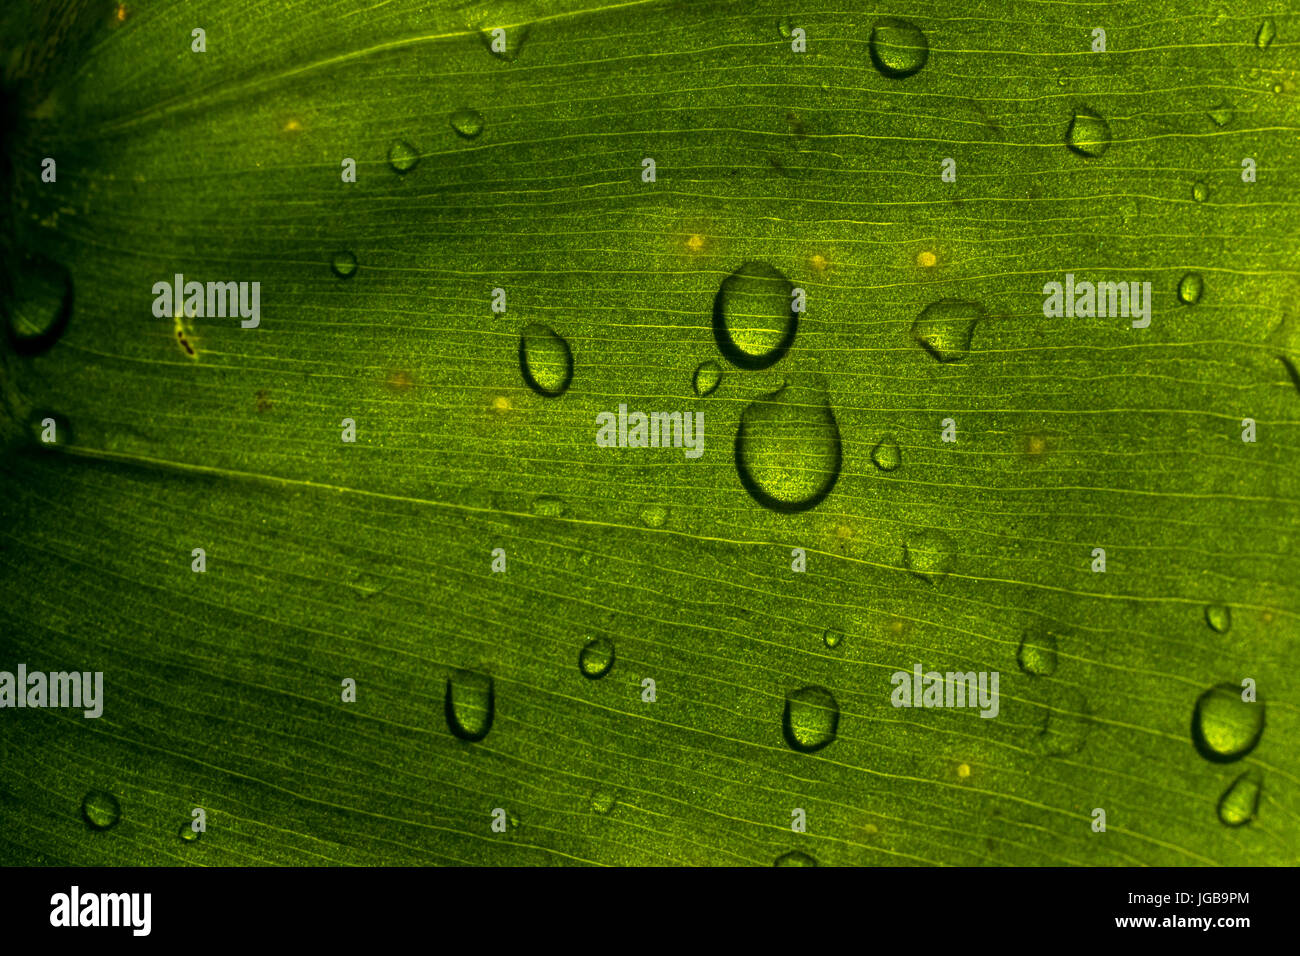 Deep green color plant leaf texture closeup, with small rain water droplets, backlit. Stock Photo